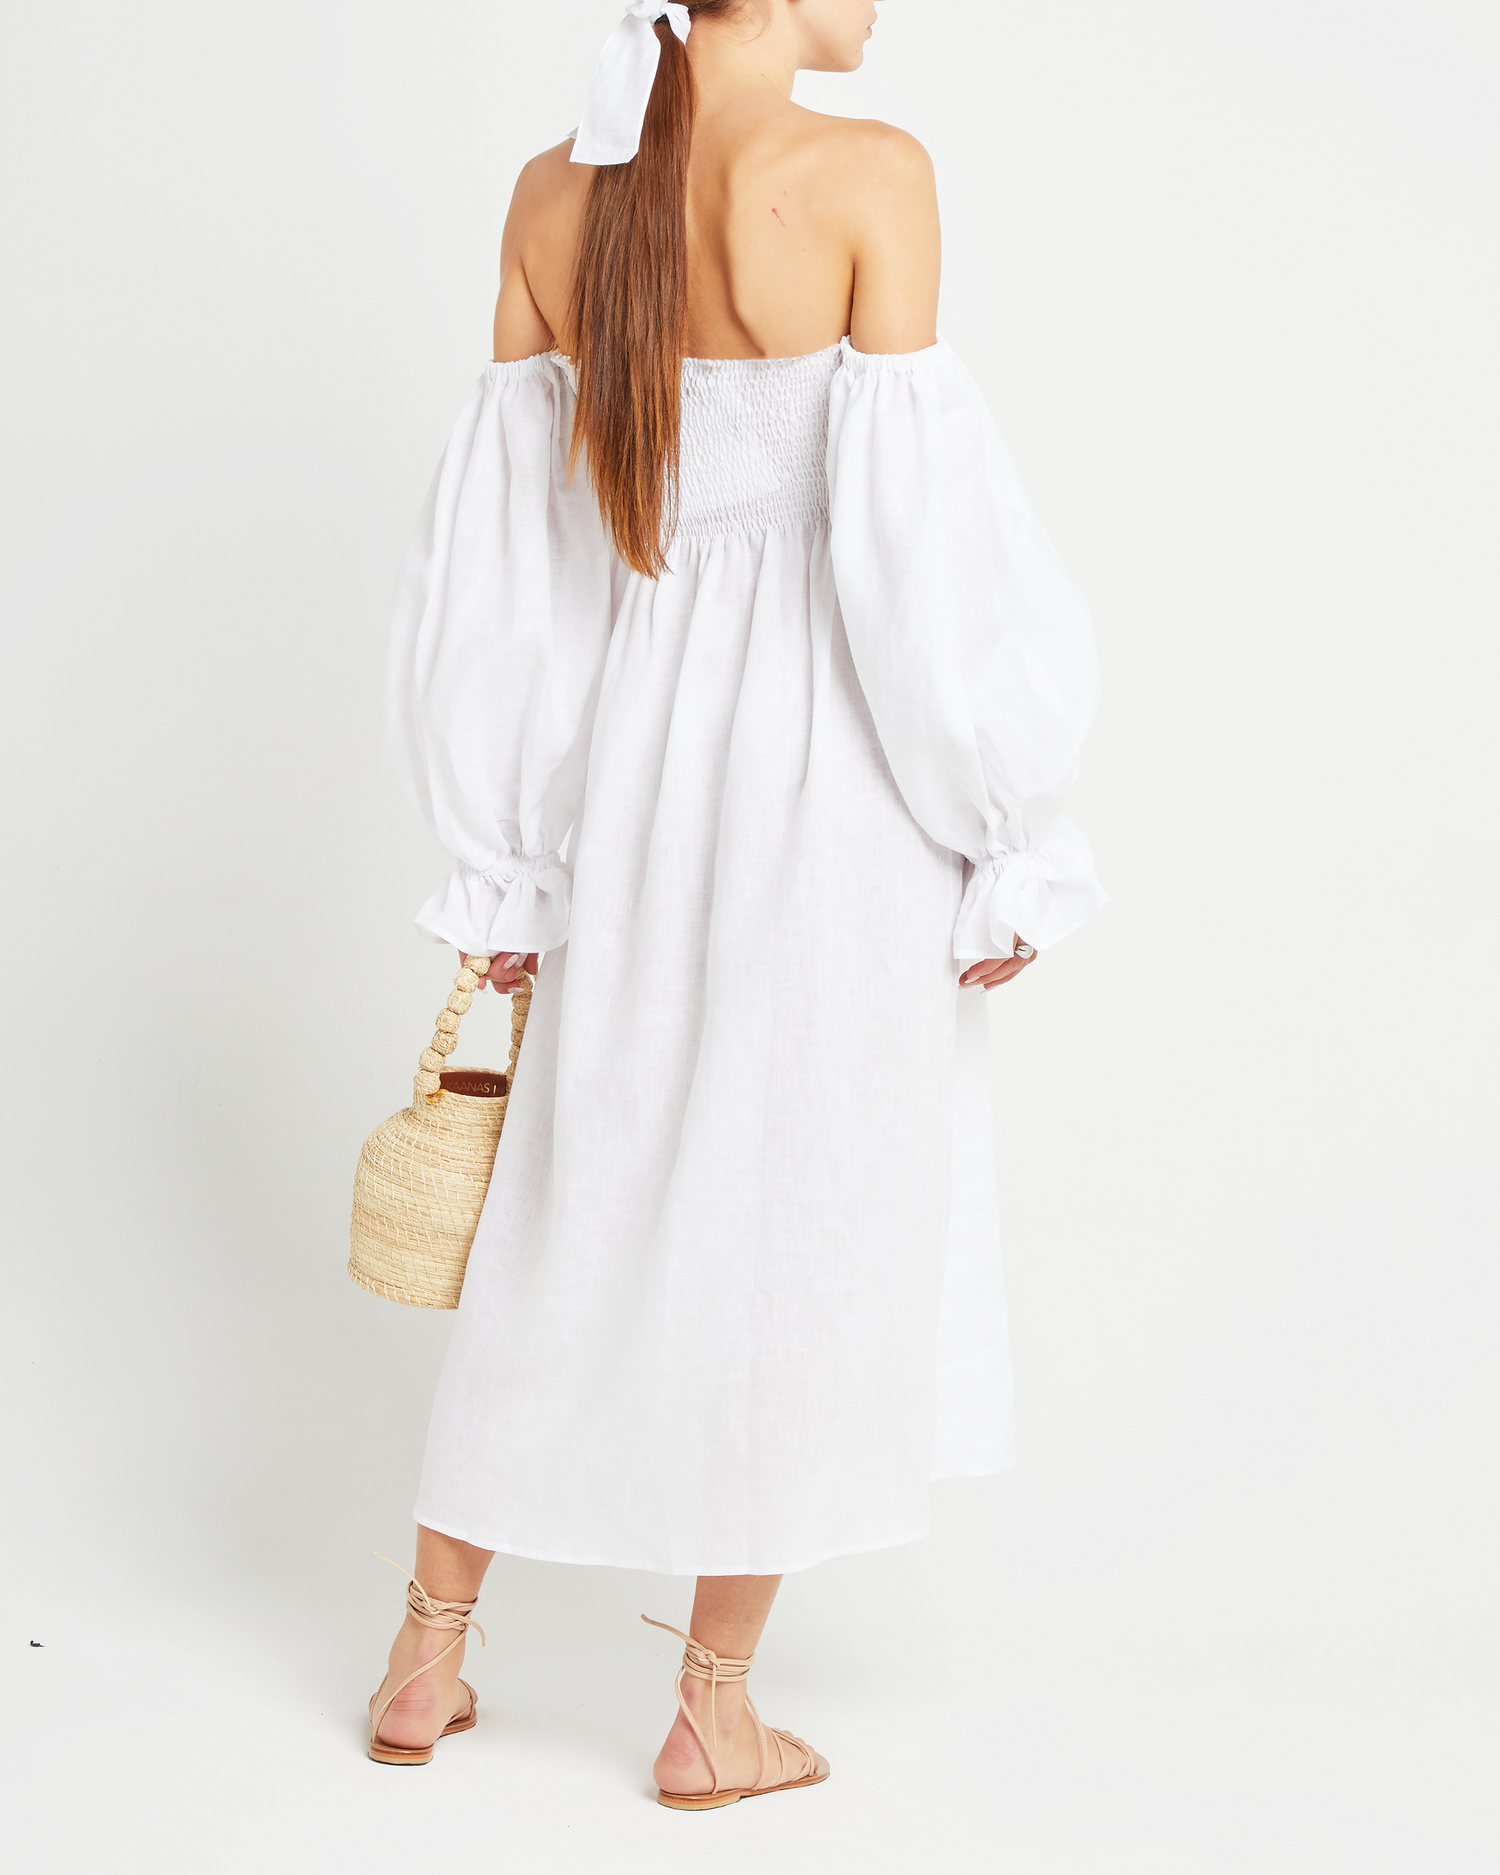 Second image of Athena Dress, a white midi dress, off shoulder, long sleeve, puff sleeves, smocked